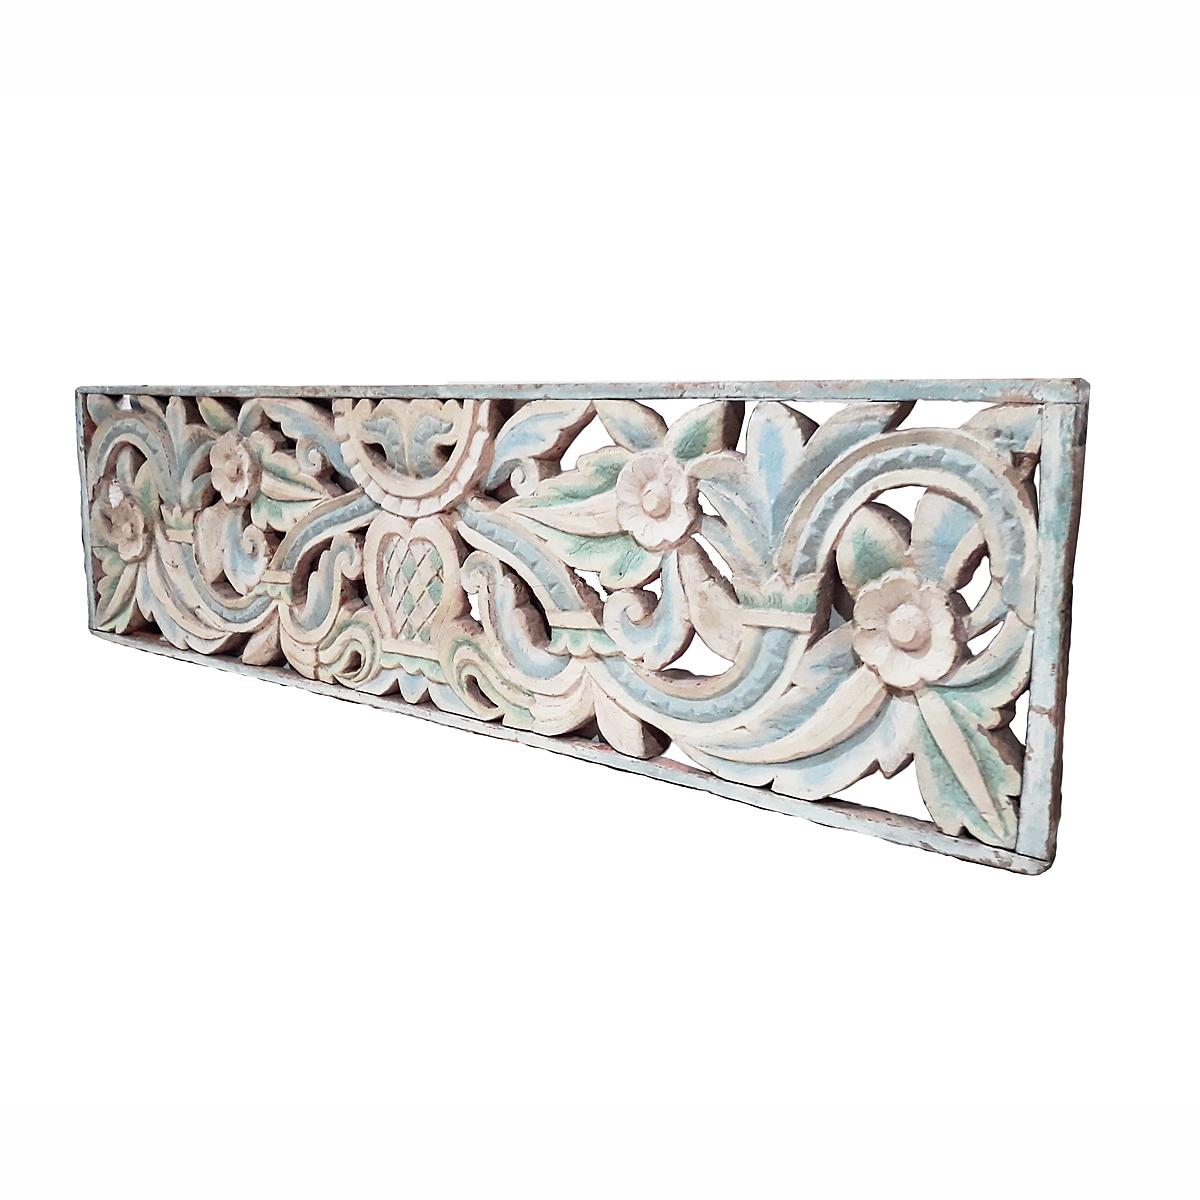 An early 20th century teak wood panel from Indonesia, intricately hand carved and polychromed in white and light blue. Floral motif, circa 1900.